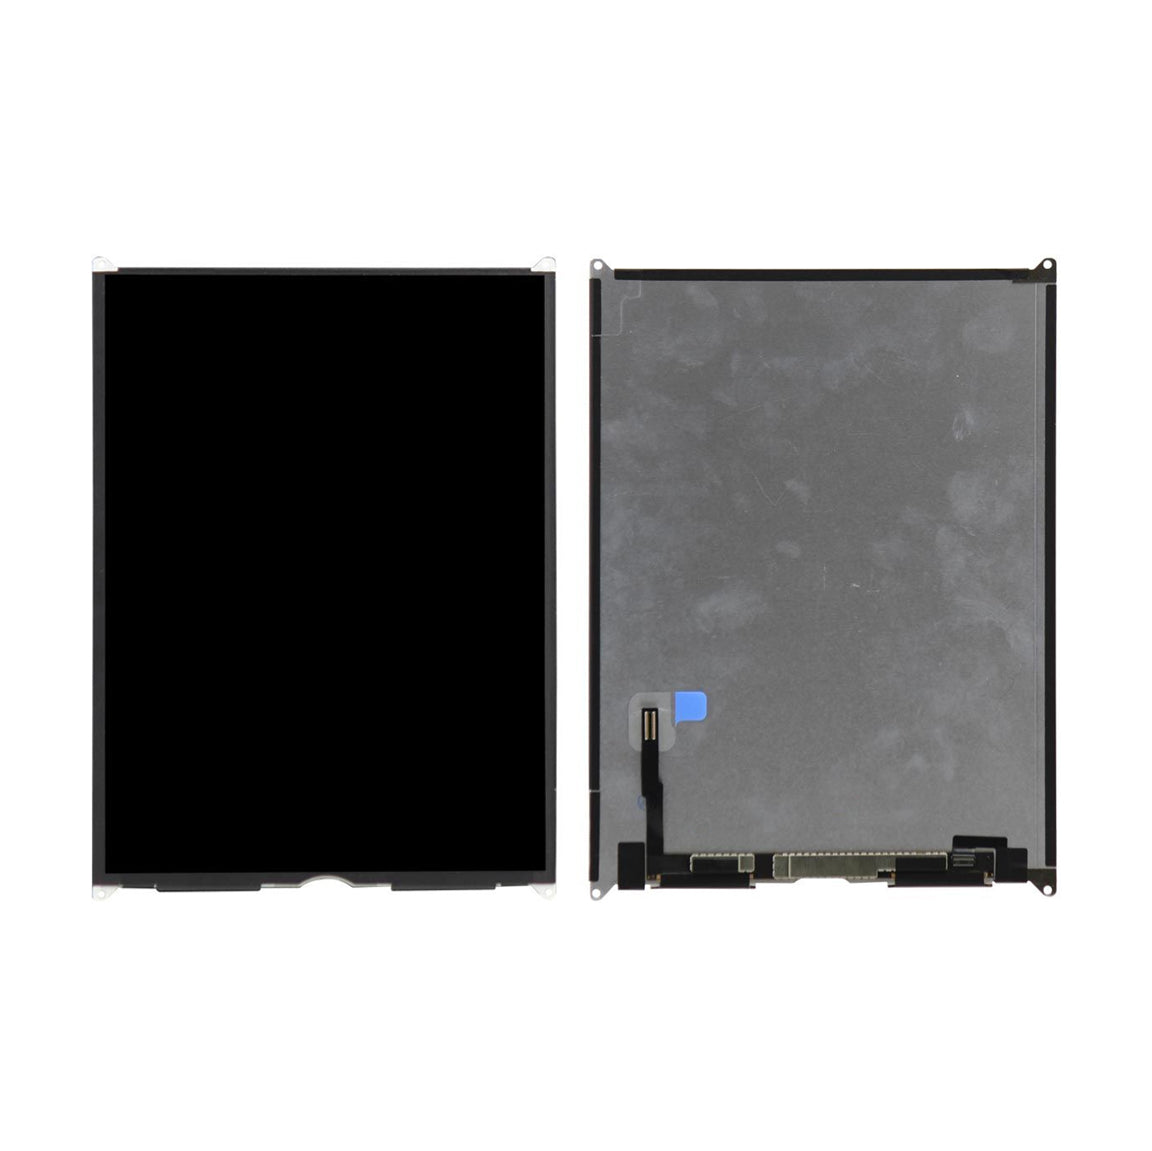 Replacement LCD Screen For Apple iPad 10.2 2019 7th Gen Display Internal Panel